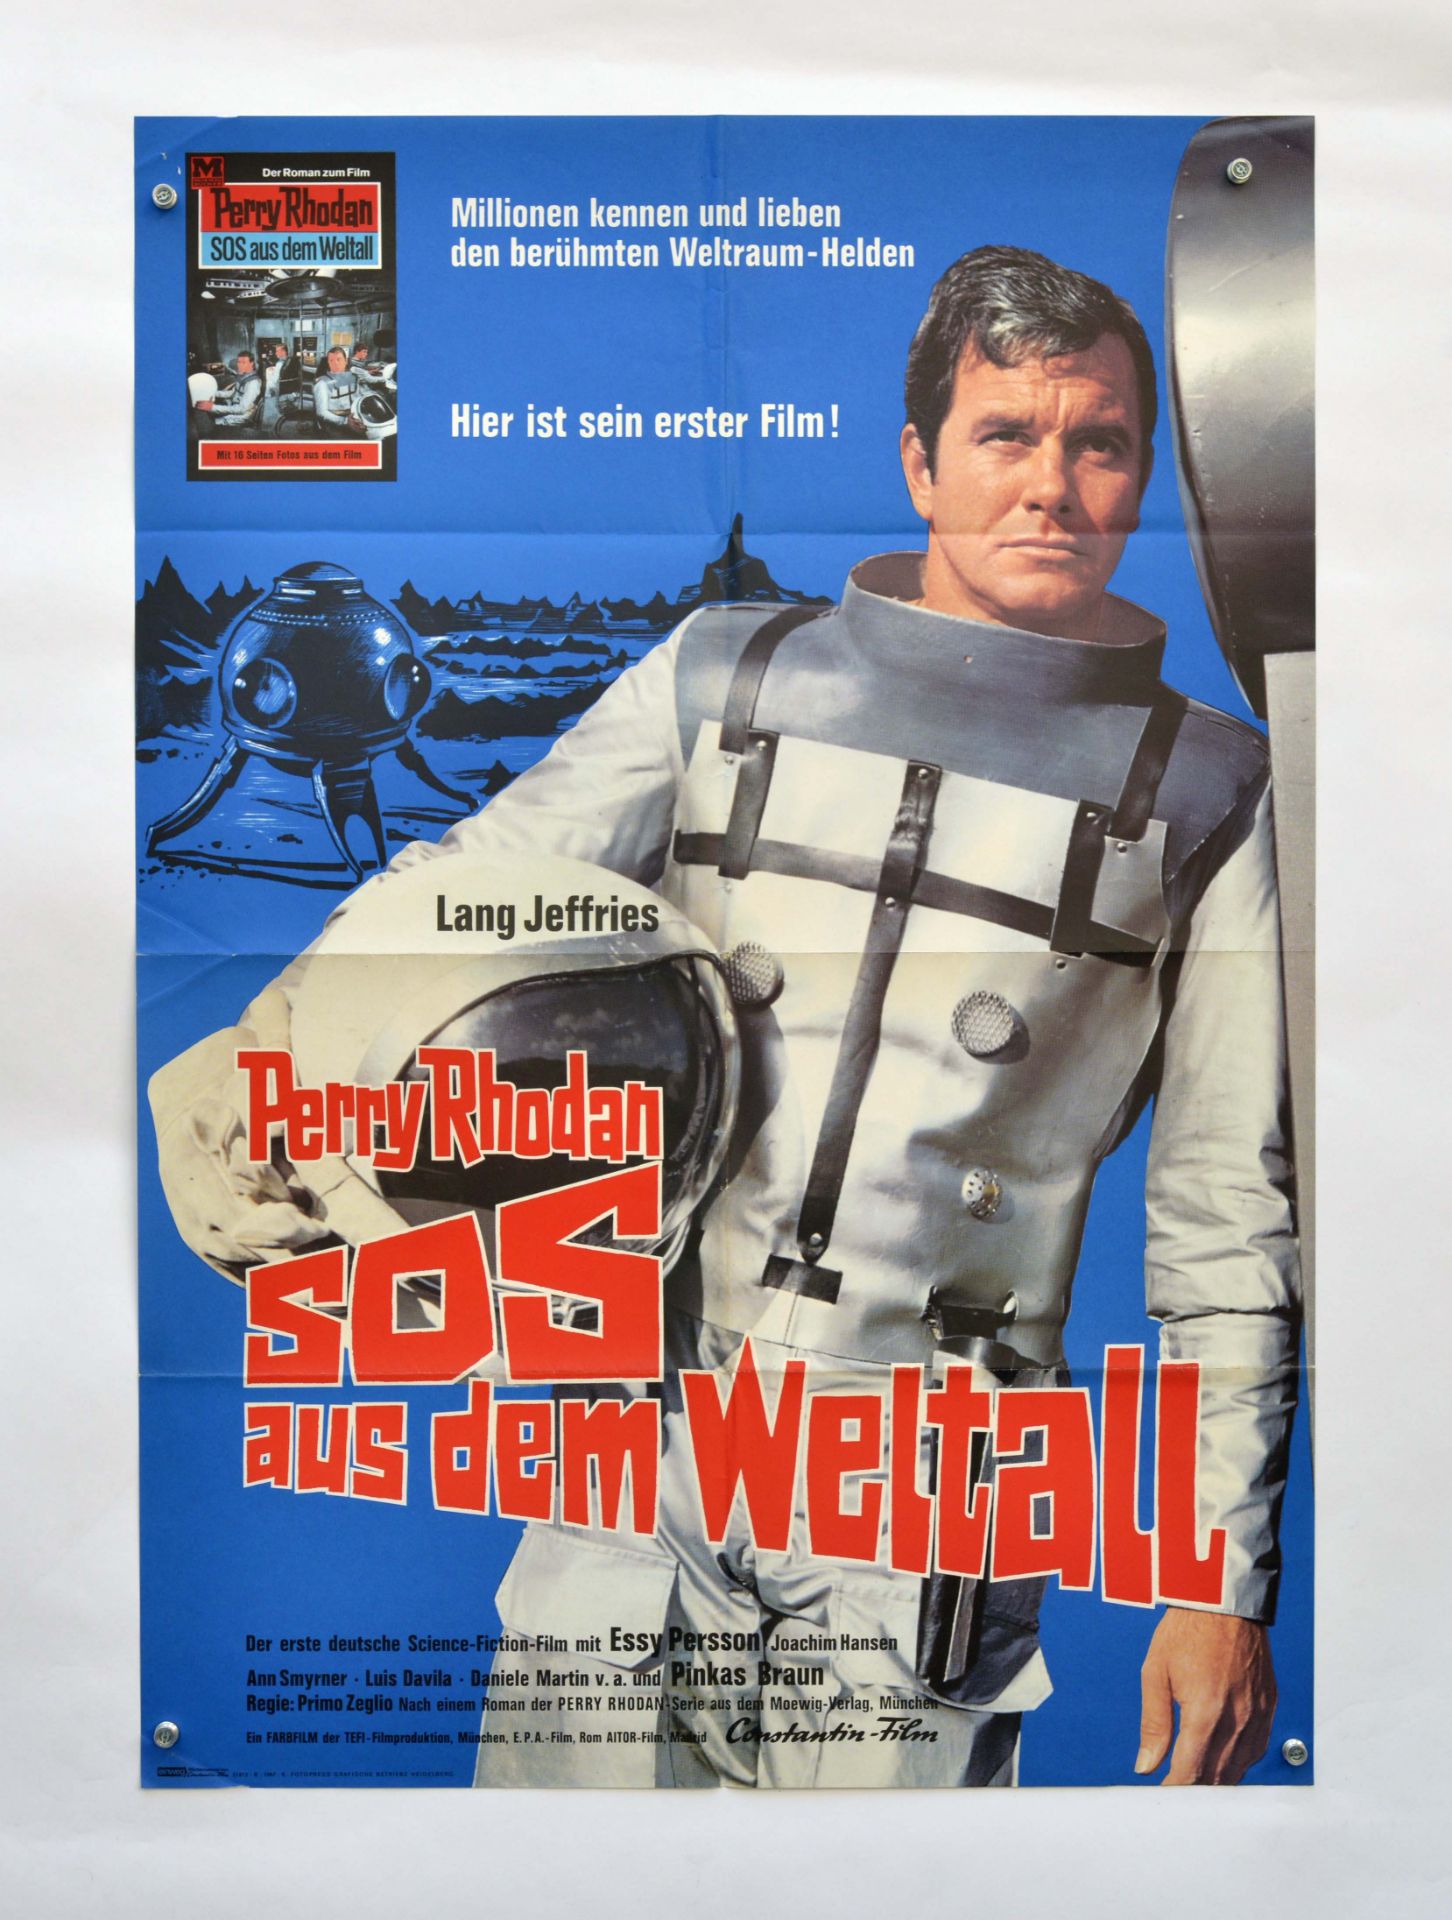 Film Poster "Perry Rhodan SOS aus dem Weltall", folds, 4 pinholes, otherwise good condition